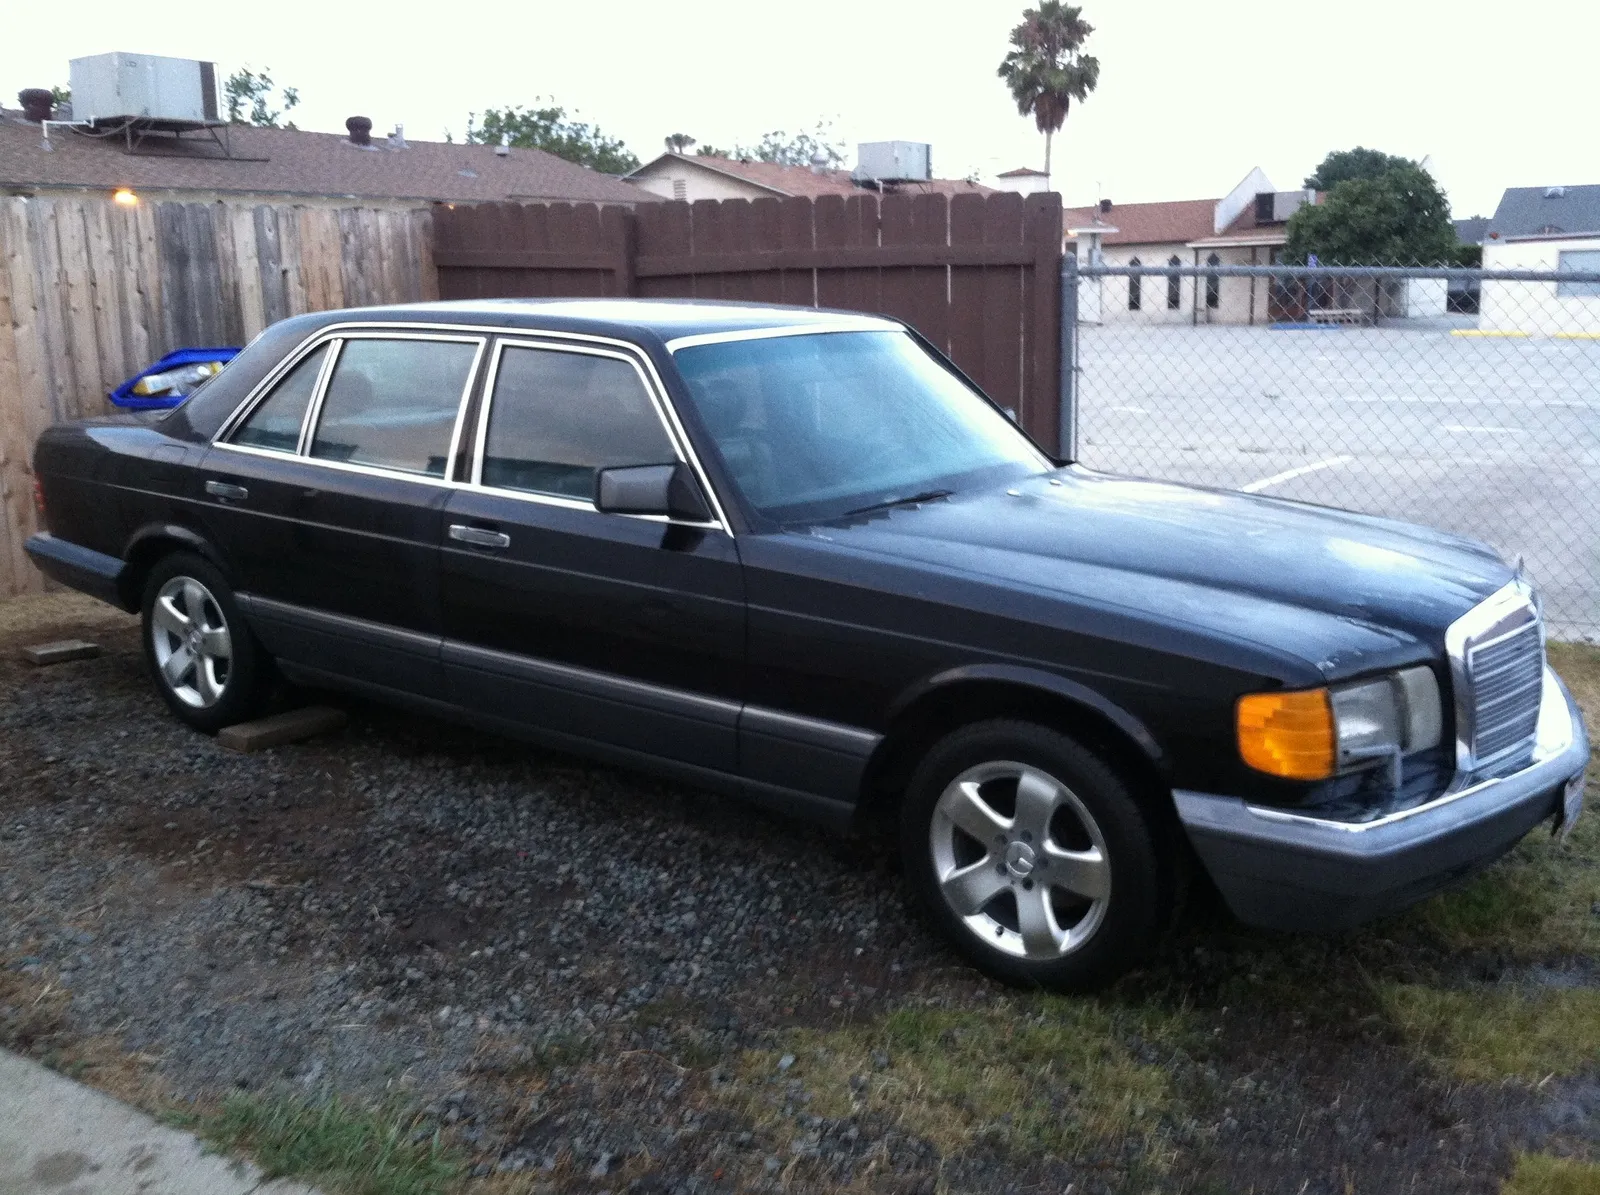 Mercedes 1991. Мерседес s class 1990. Мерседес Бенц 1990. Мерседес е 1991. Mercedes Benz 1990.